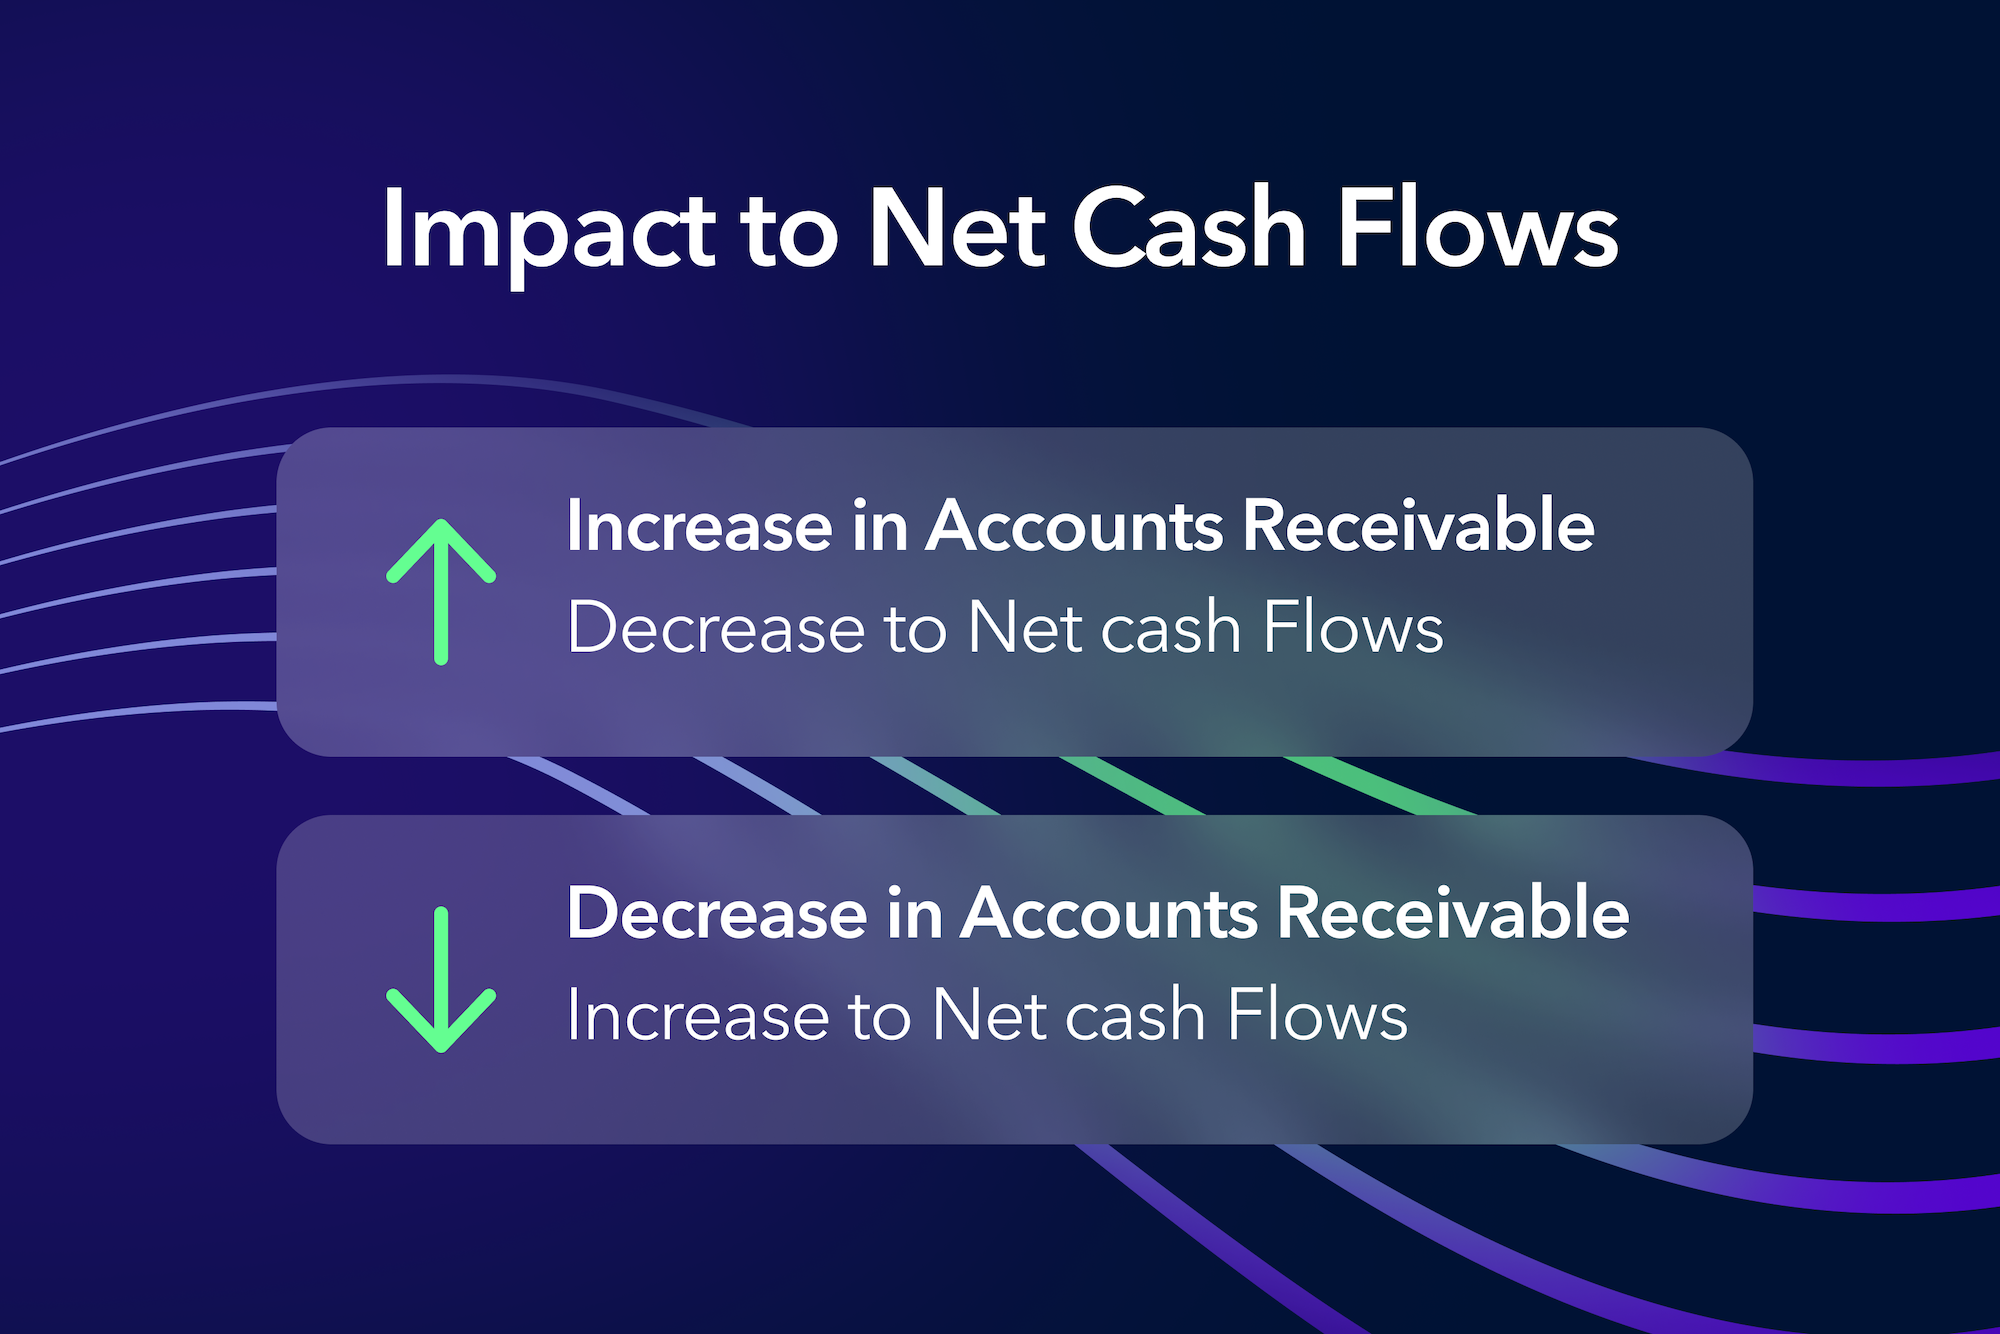 Increase in AR means decrease to net cash flows. Decrease in AR means increase to net cash flows.